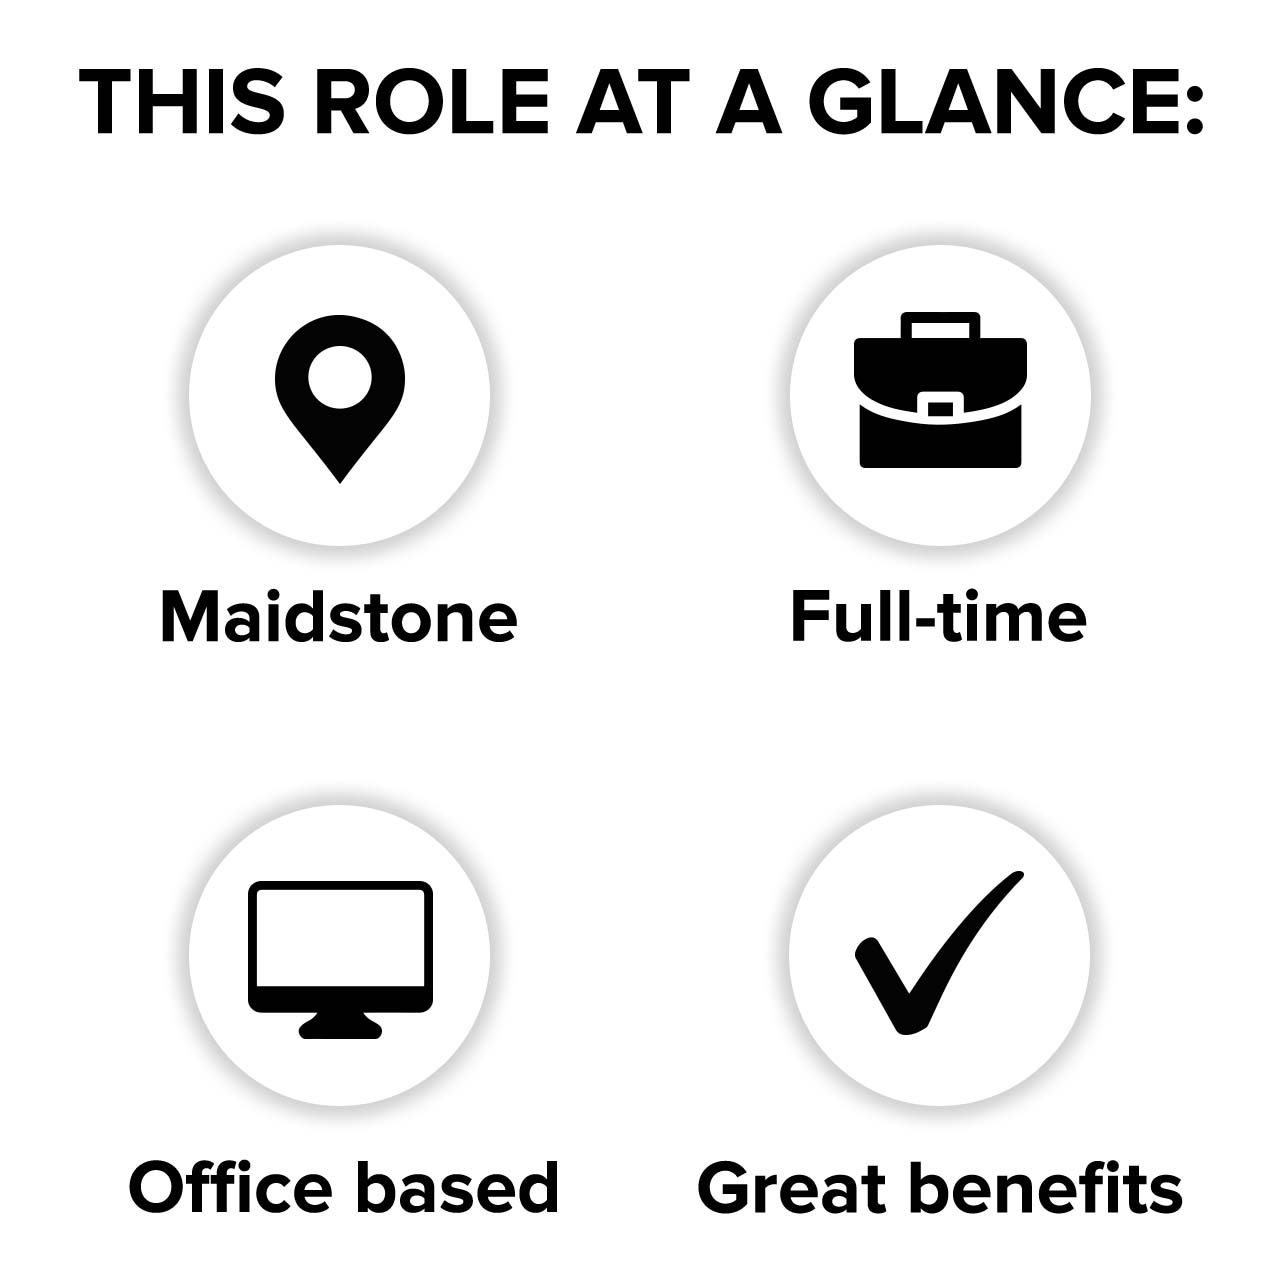 HR and Admin Officer at Laguna Motorcycles in Maidstone at a glance